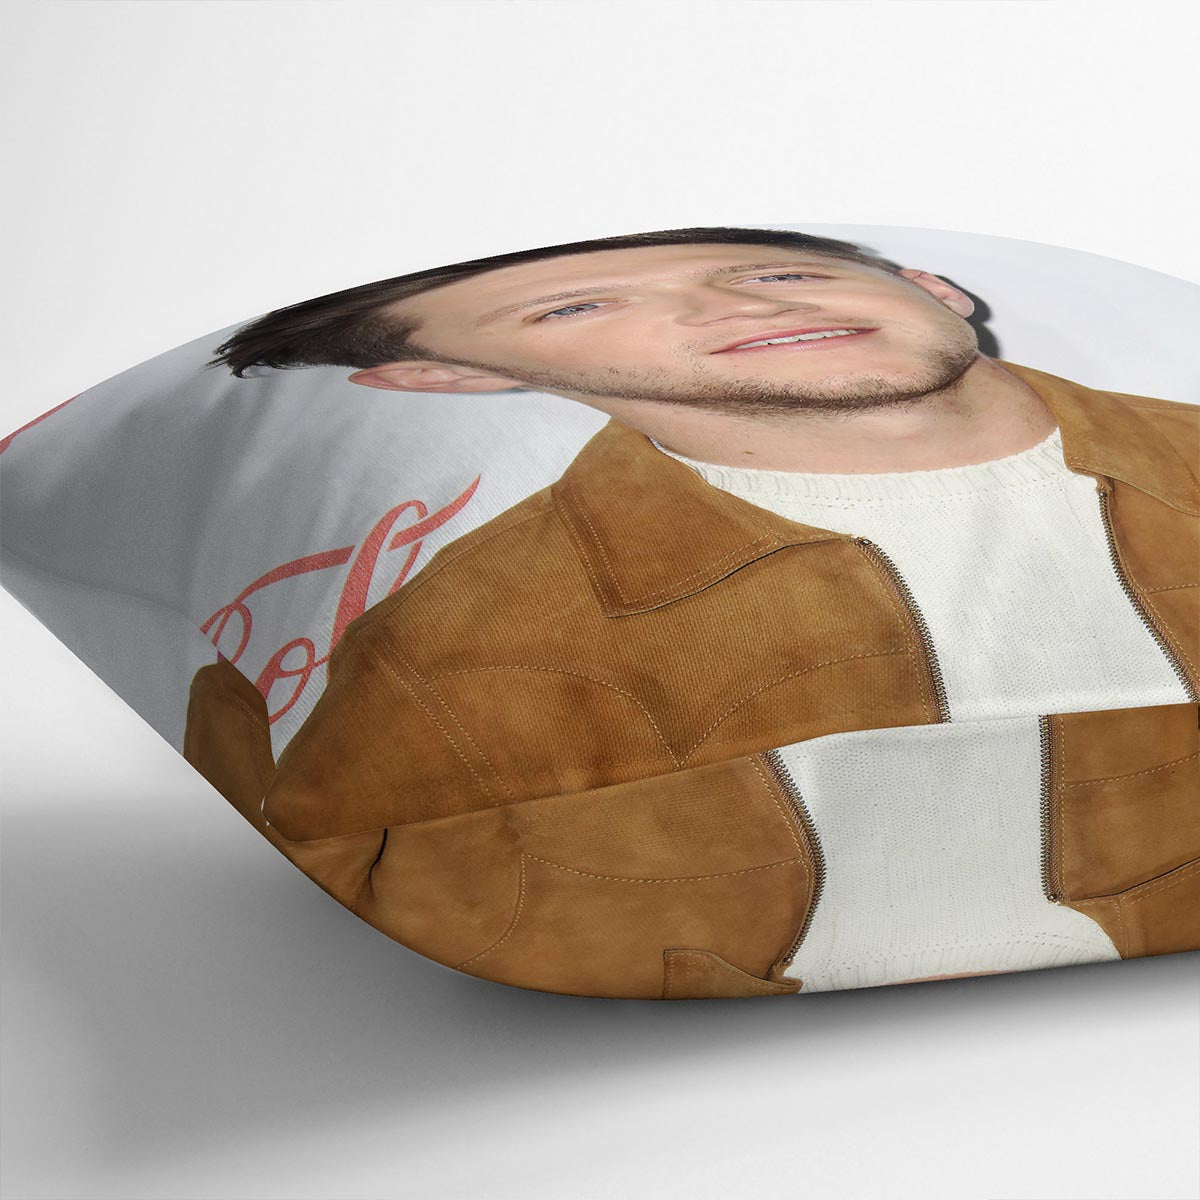 Niall Horan of One Direction Cushion